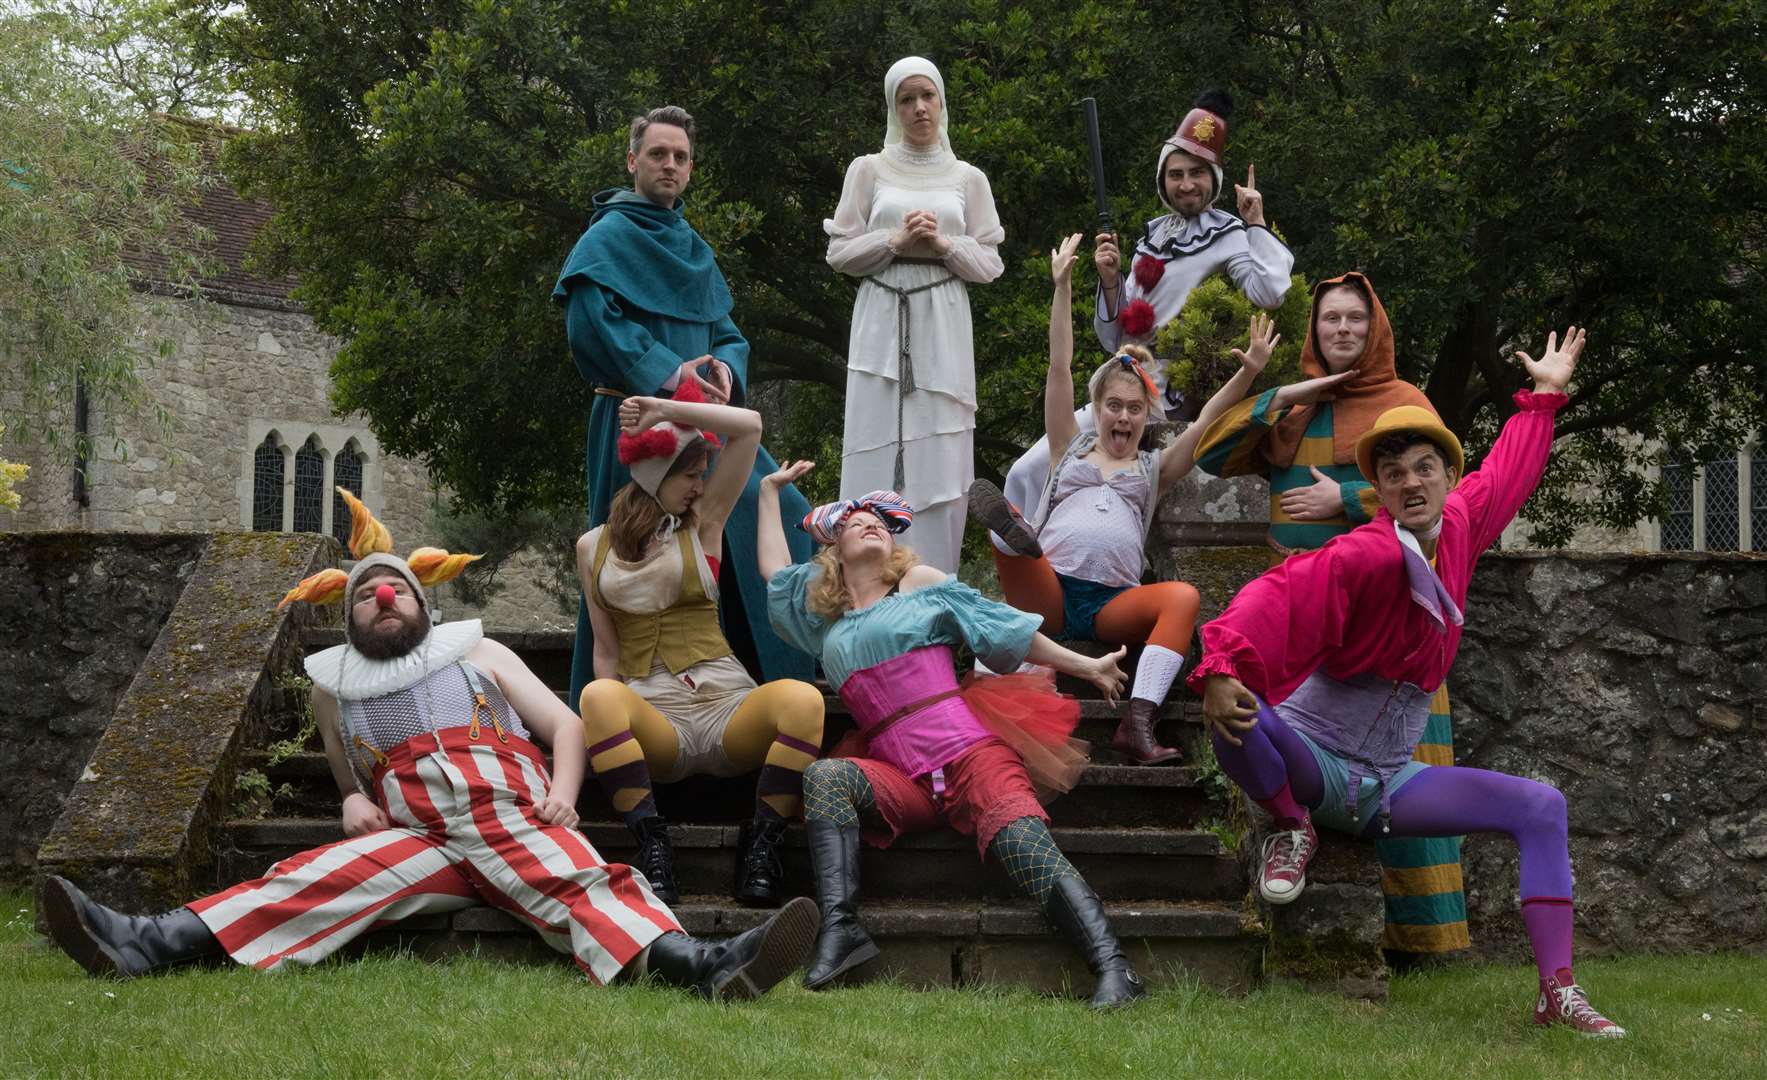 The cast of Measure for Measure